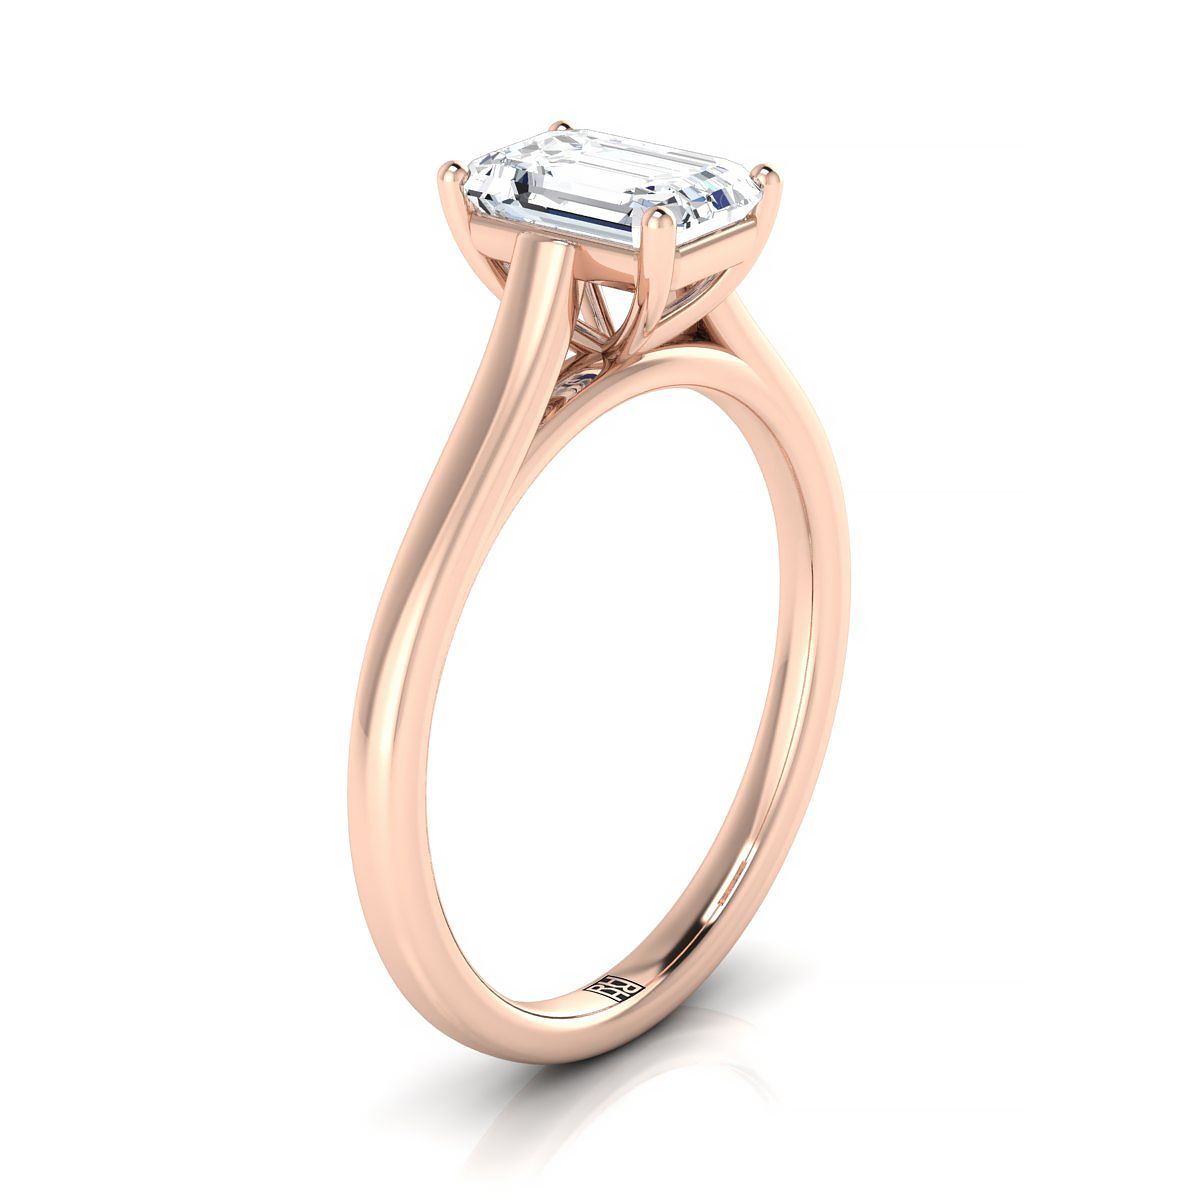 14K Rose Gold Emerald Cut  Elegant Cathedral Solitaire Engagement Ring